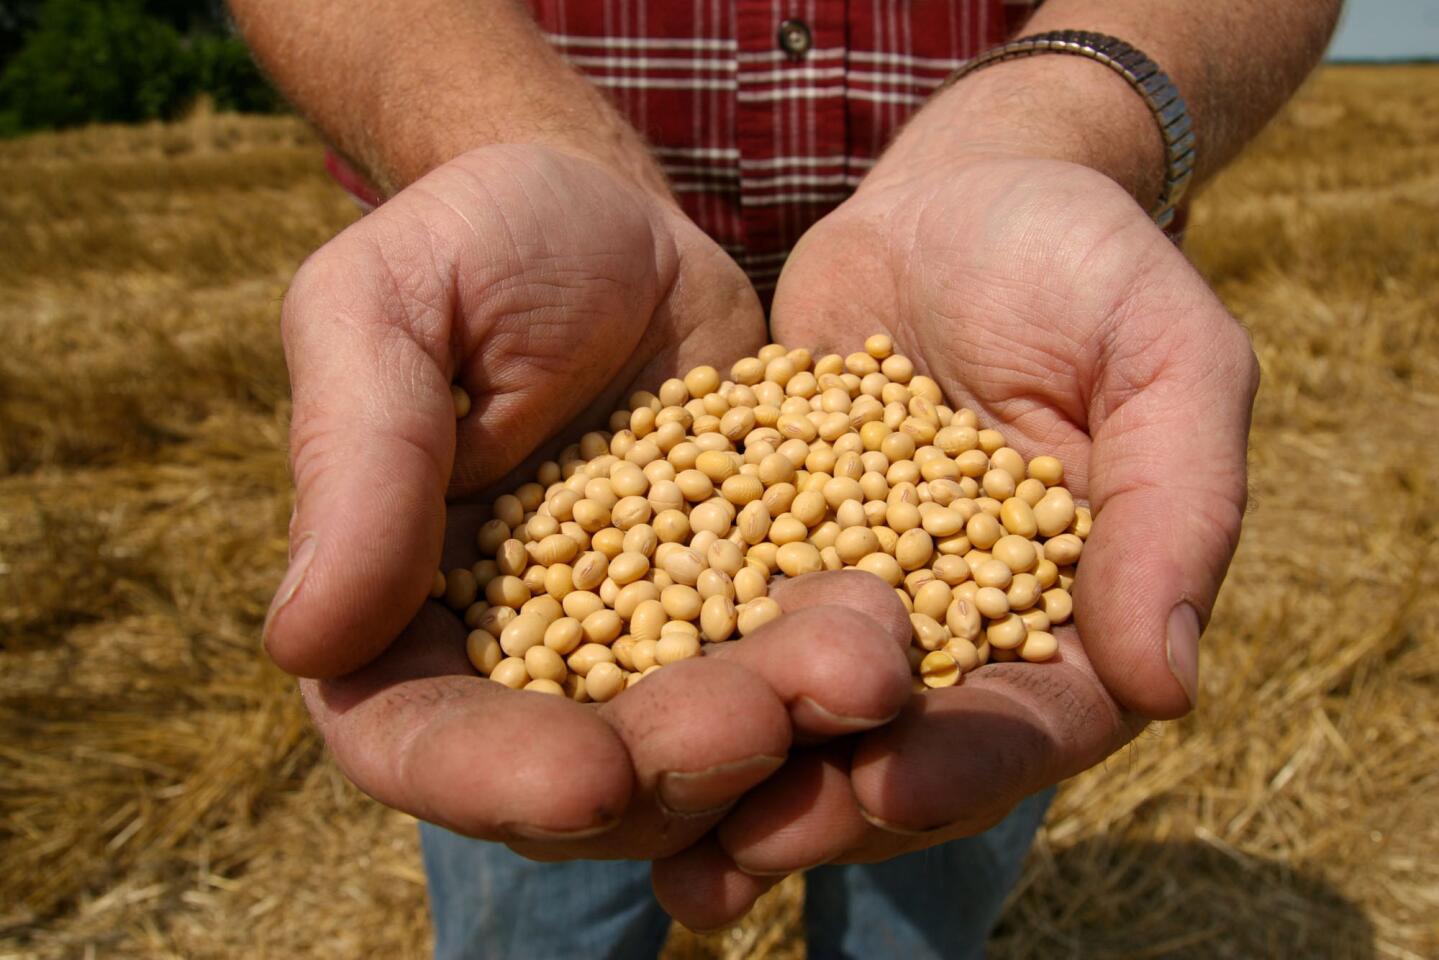 The most commonly bioengineered food crop, about 95% of soybeans have been genetically modified in the laboratory, often, as with corn, to be Roundup ready, or able to withstand the herbicide glyphosate. This isn't just about tofu; many processed foods contain soy, perhaps most commonly as the emulsifier lecithin (one of the 10 most common ingredients in processed foods) but also in the form of soybean oil and soy sauce. Above, a farmer holds Monsanto's Roundup-ready soybean seeds at his family farm in Bunceton, Mo.